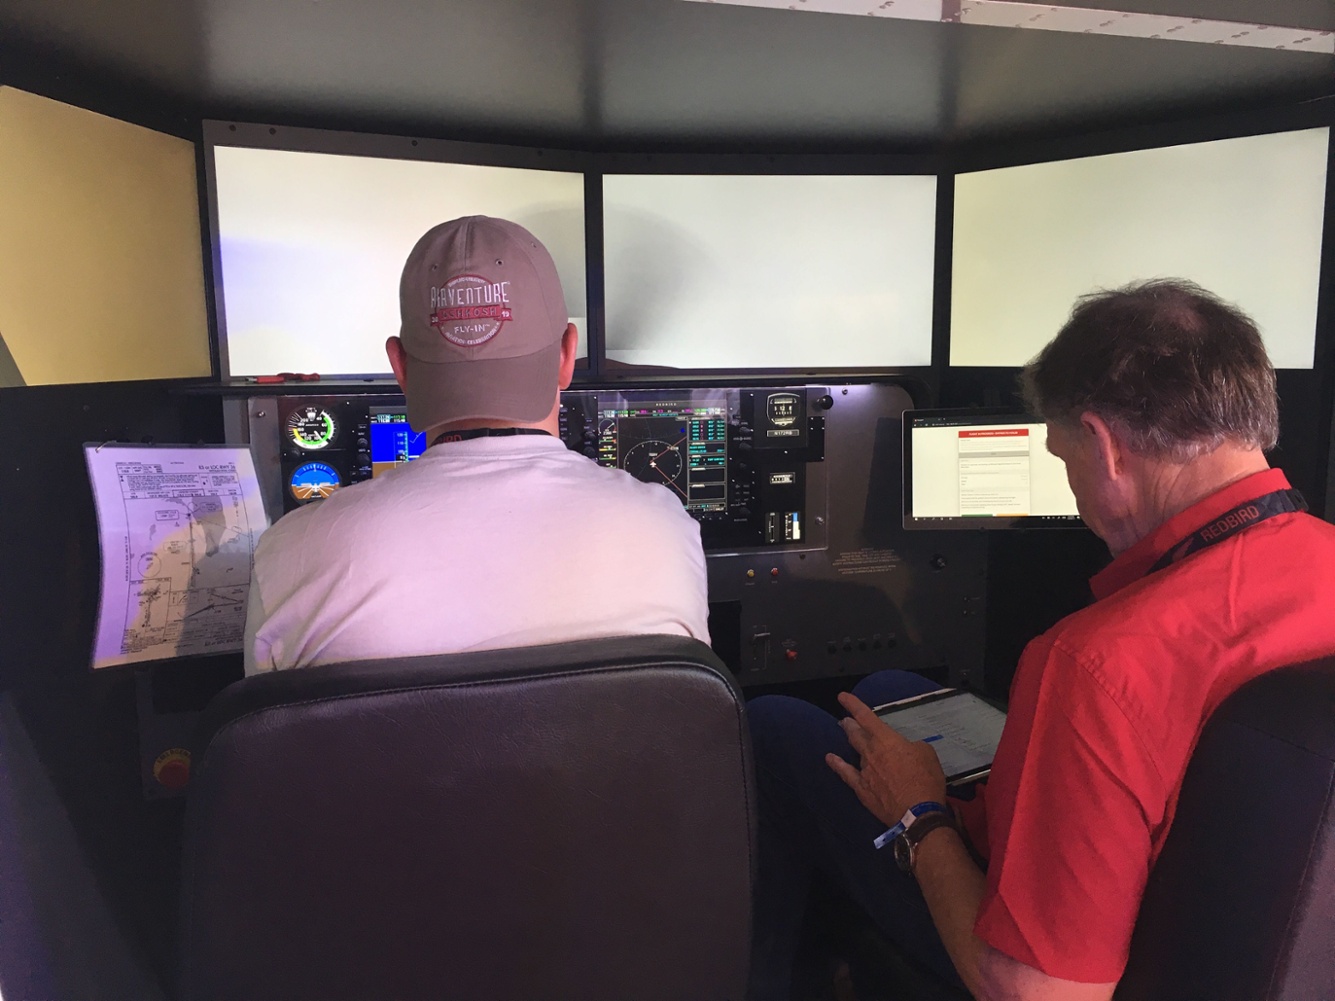 Flight instructor adjusts the weather conditions during an IFR training session in a Redbird simulator